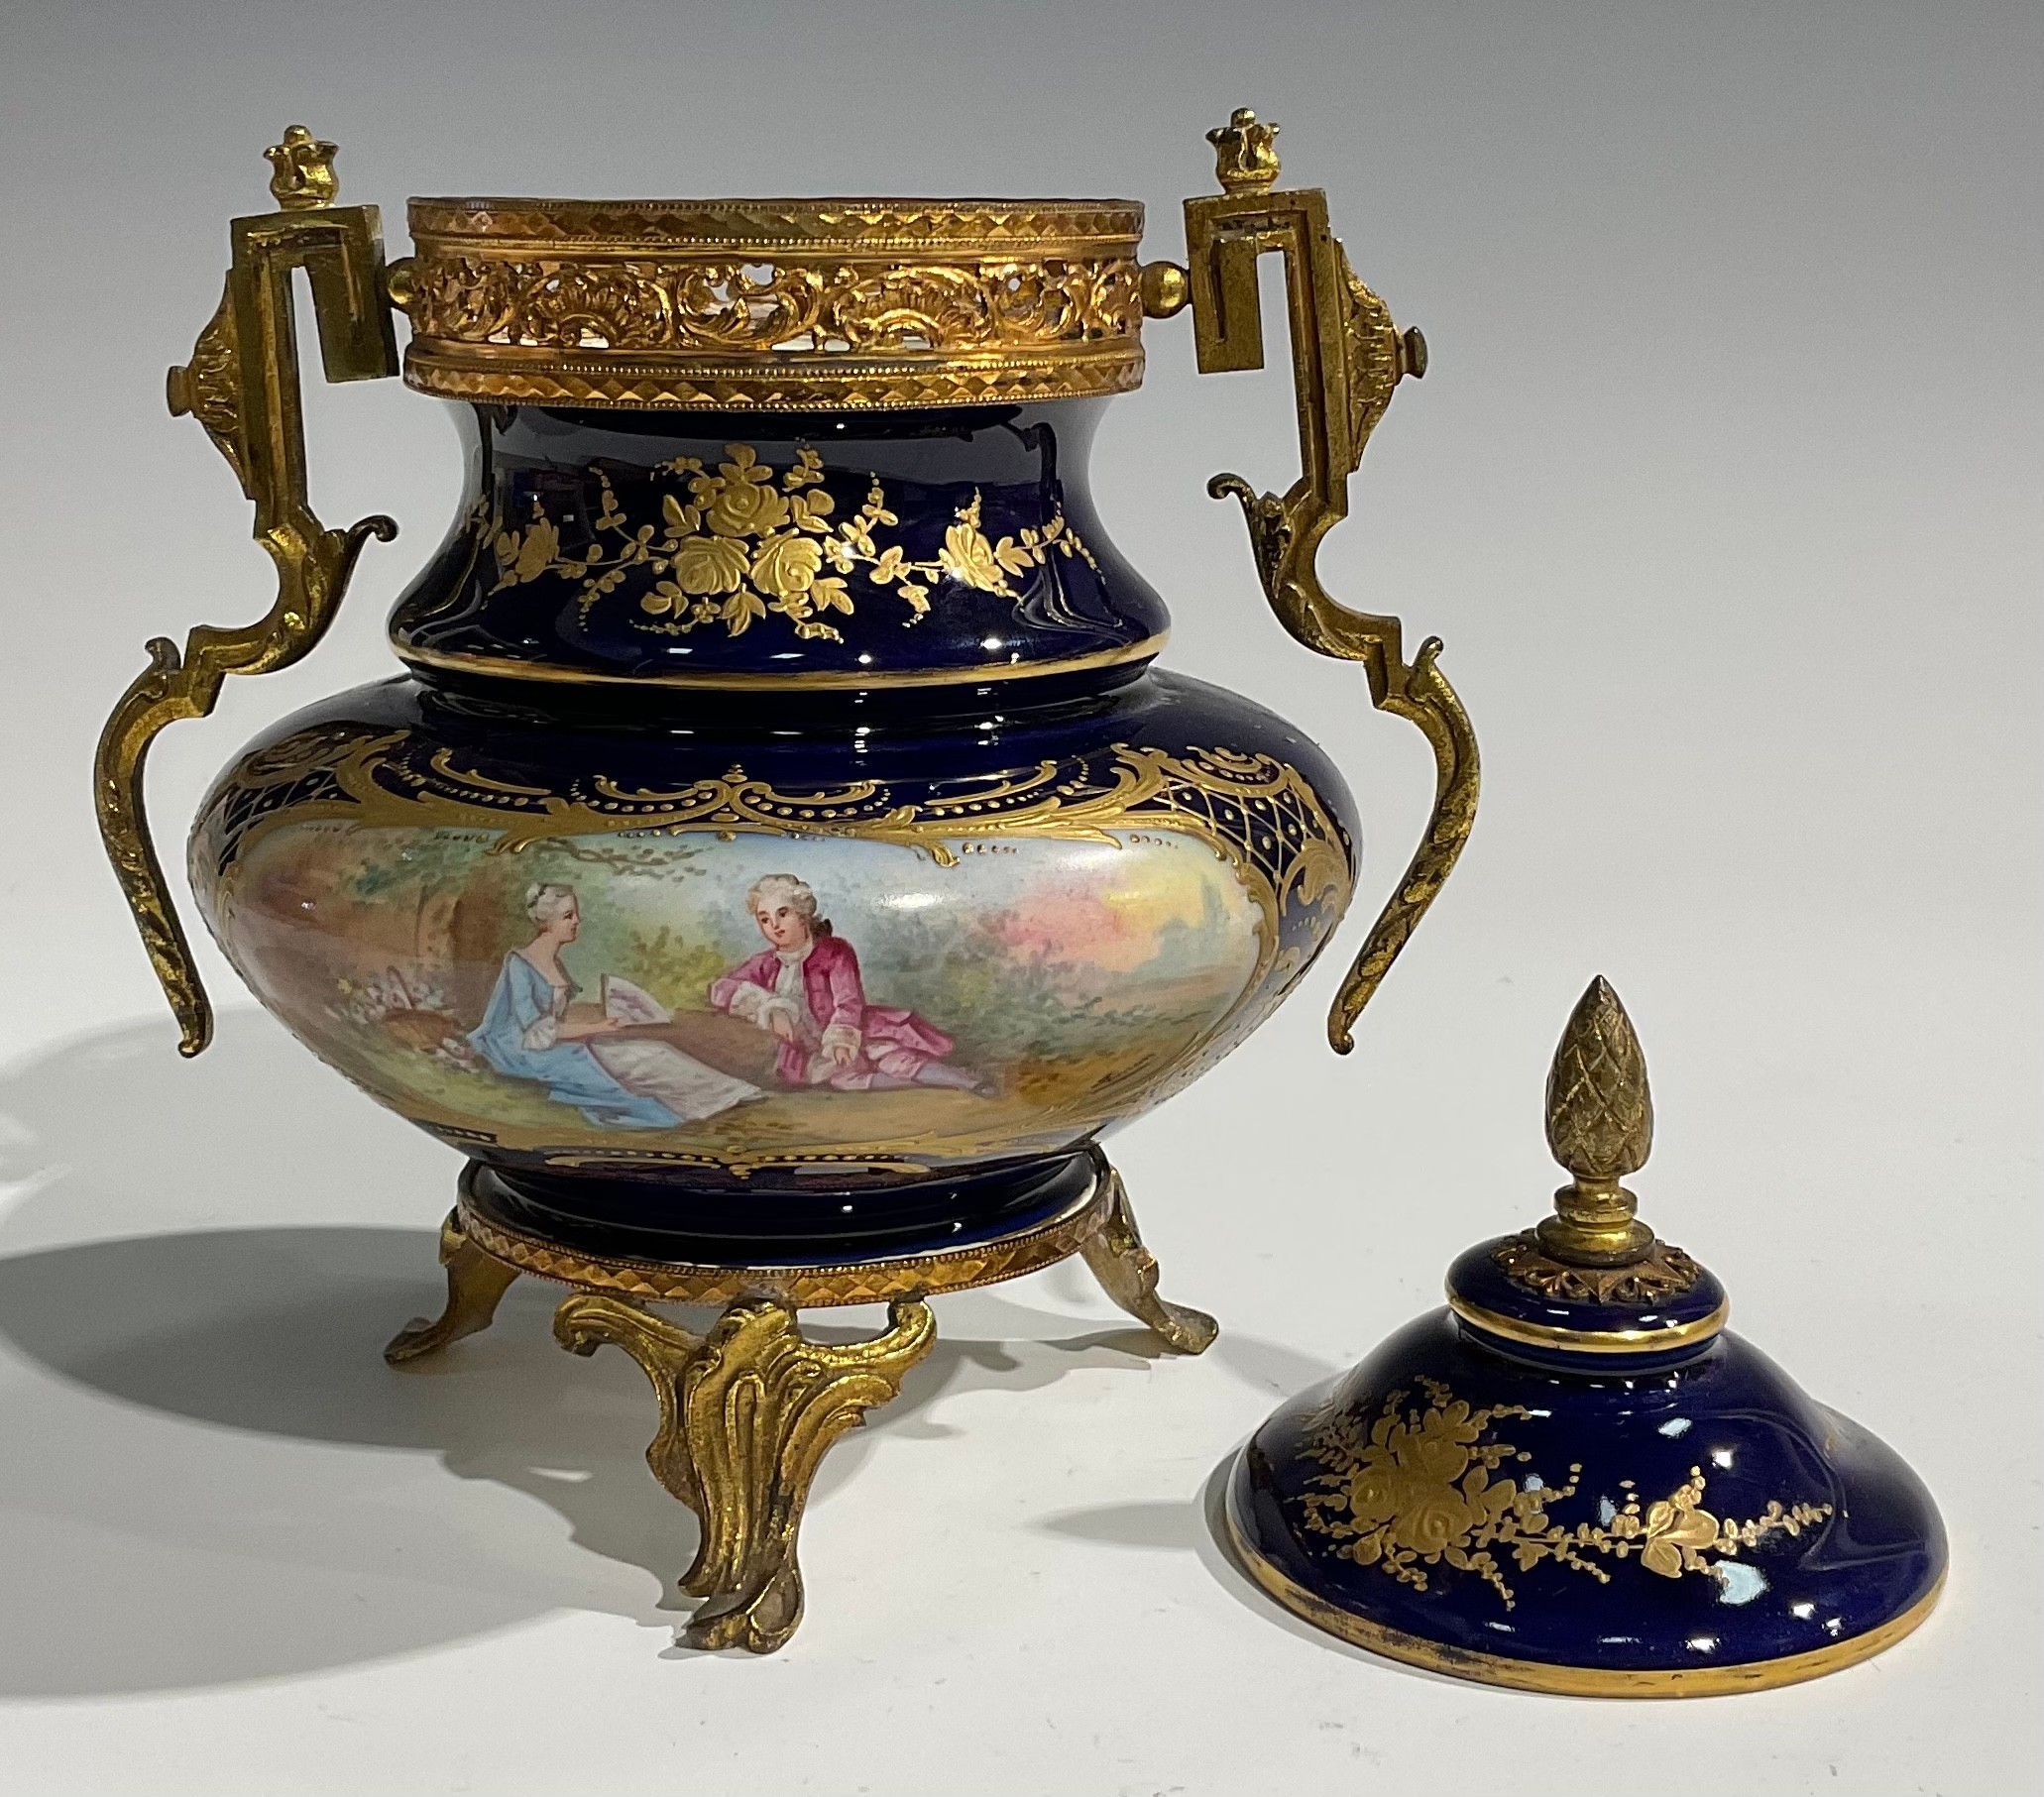 A French porcelain gilt-metal mounted ovoid potpourri vase and cover, in the Louis XVI taste, - Image 6 of 7